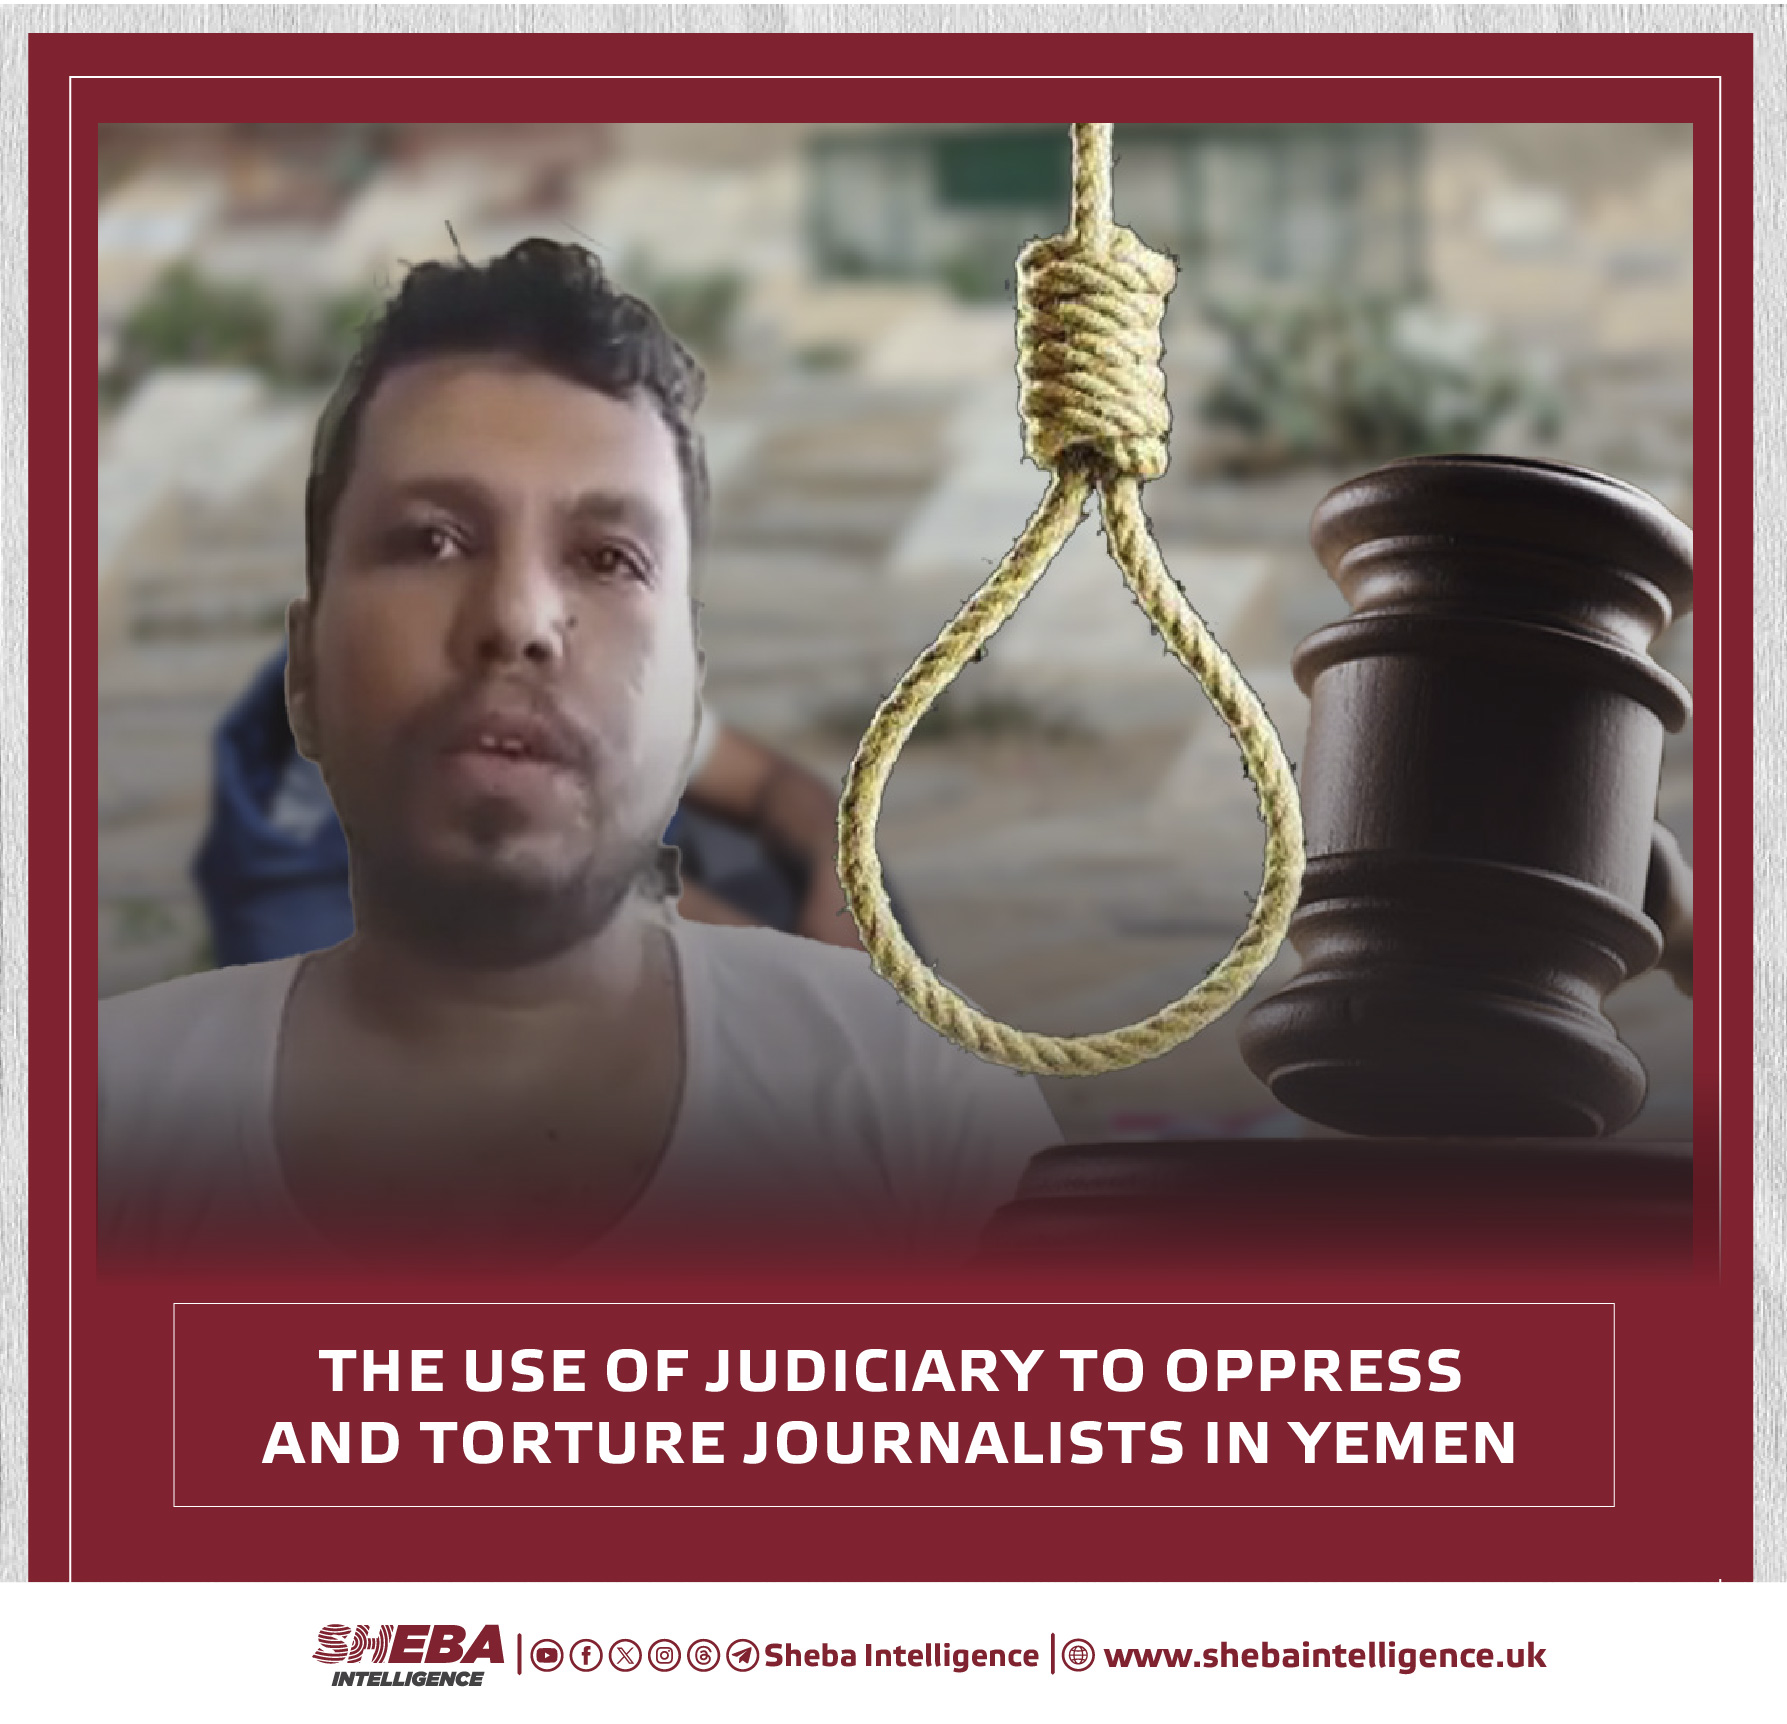 The Use of Judiciary to Oppress and Torture Journalists in Yemen